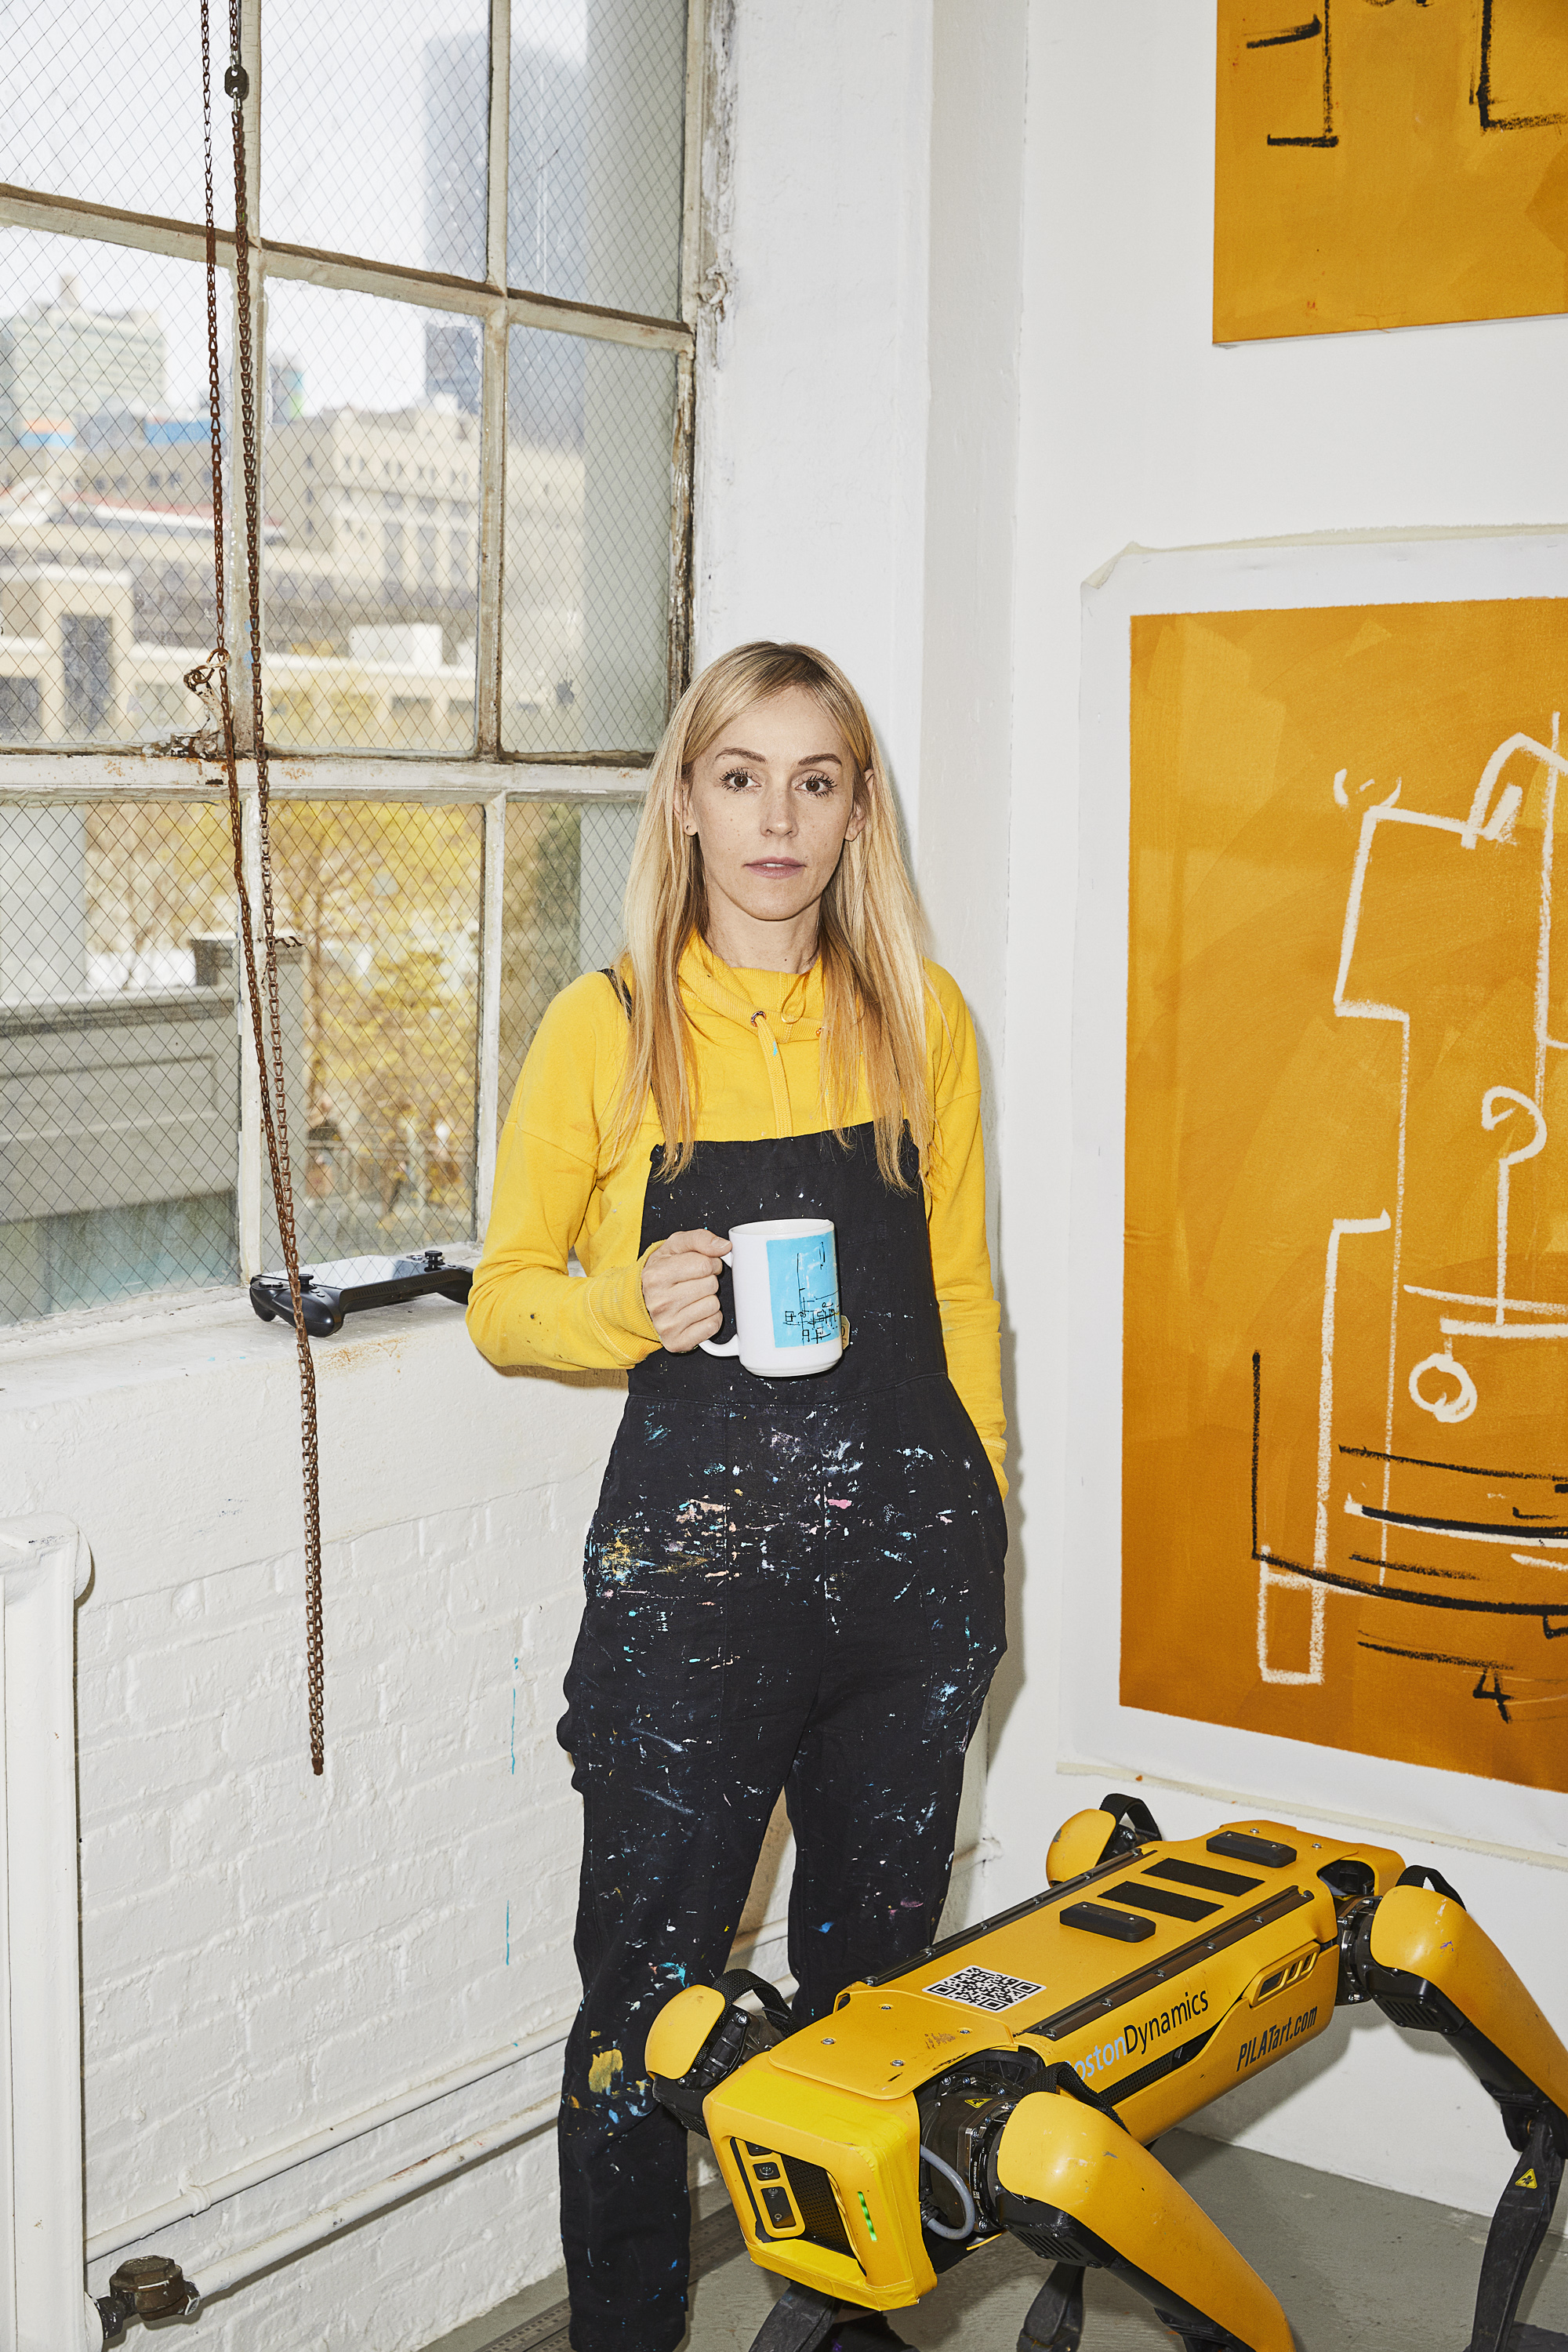 A middle-aged woman with long blonde hair stands in a studio space, wearing paint-covered overalls, with a yellow robot dog.